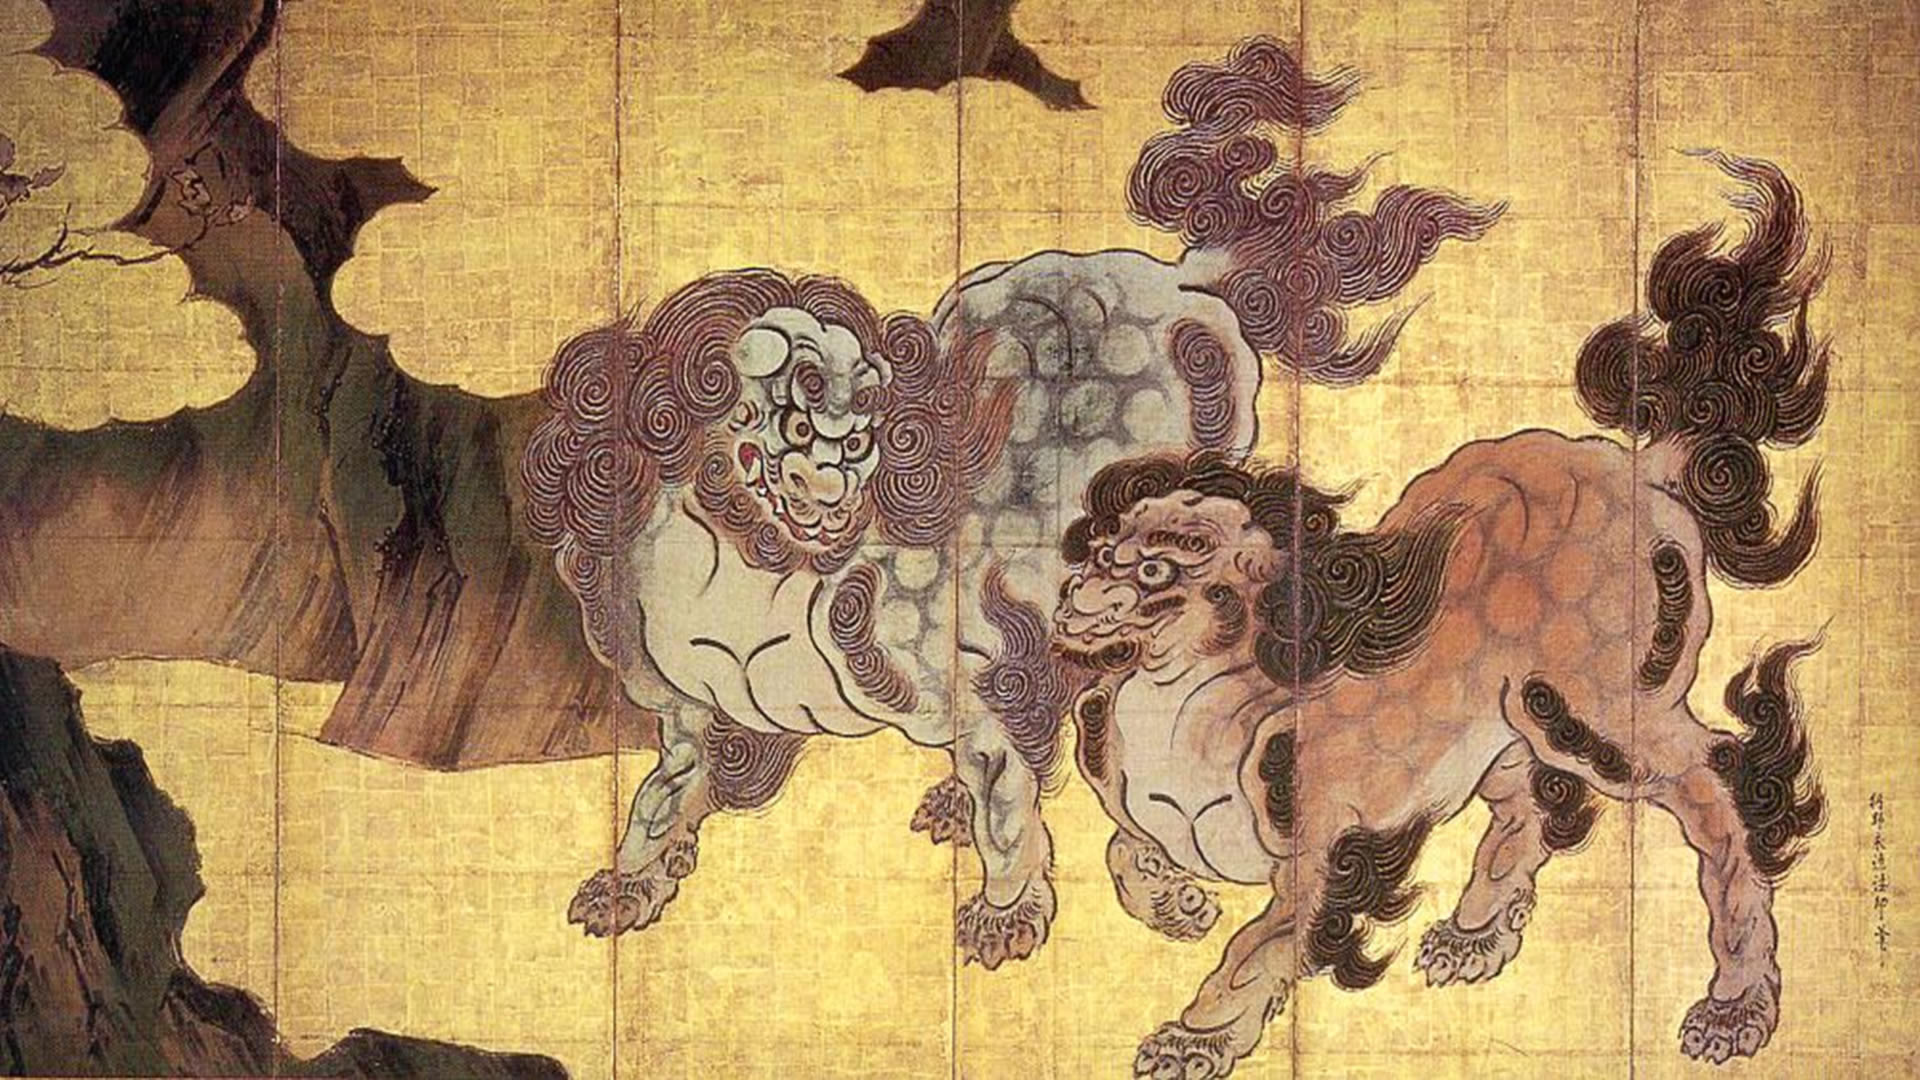 Two Chinese Lions In The Clouds - Lion Traditional Chinese Art - HD Wallpaper 